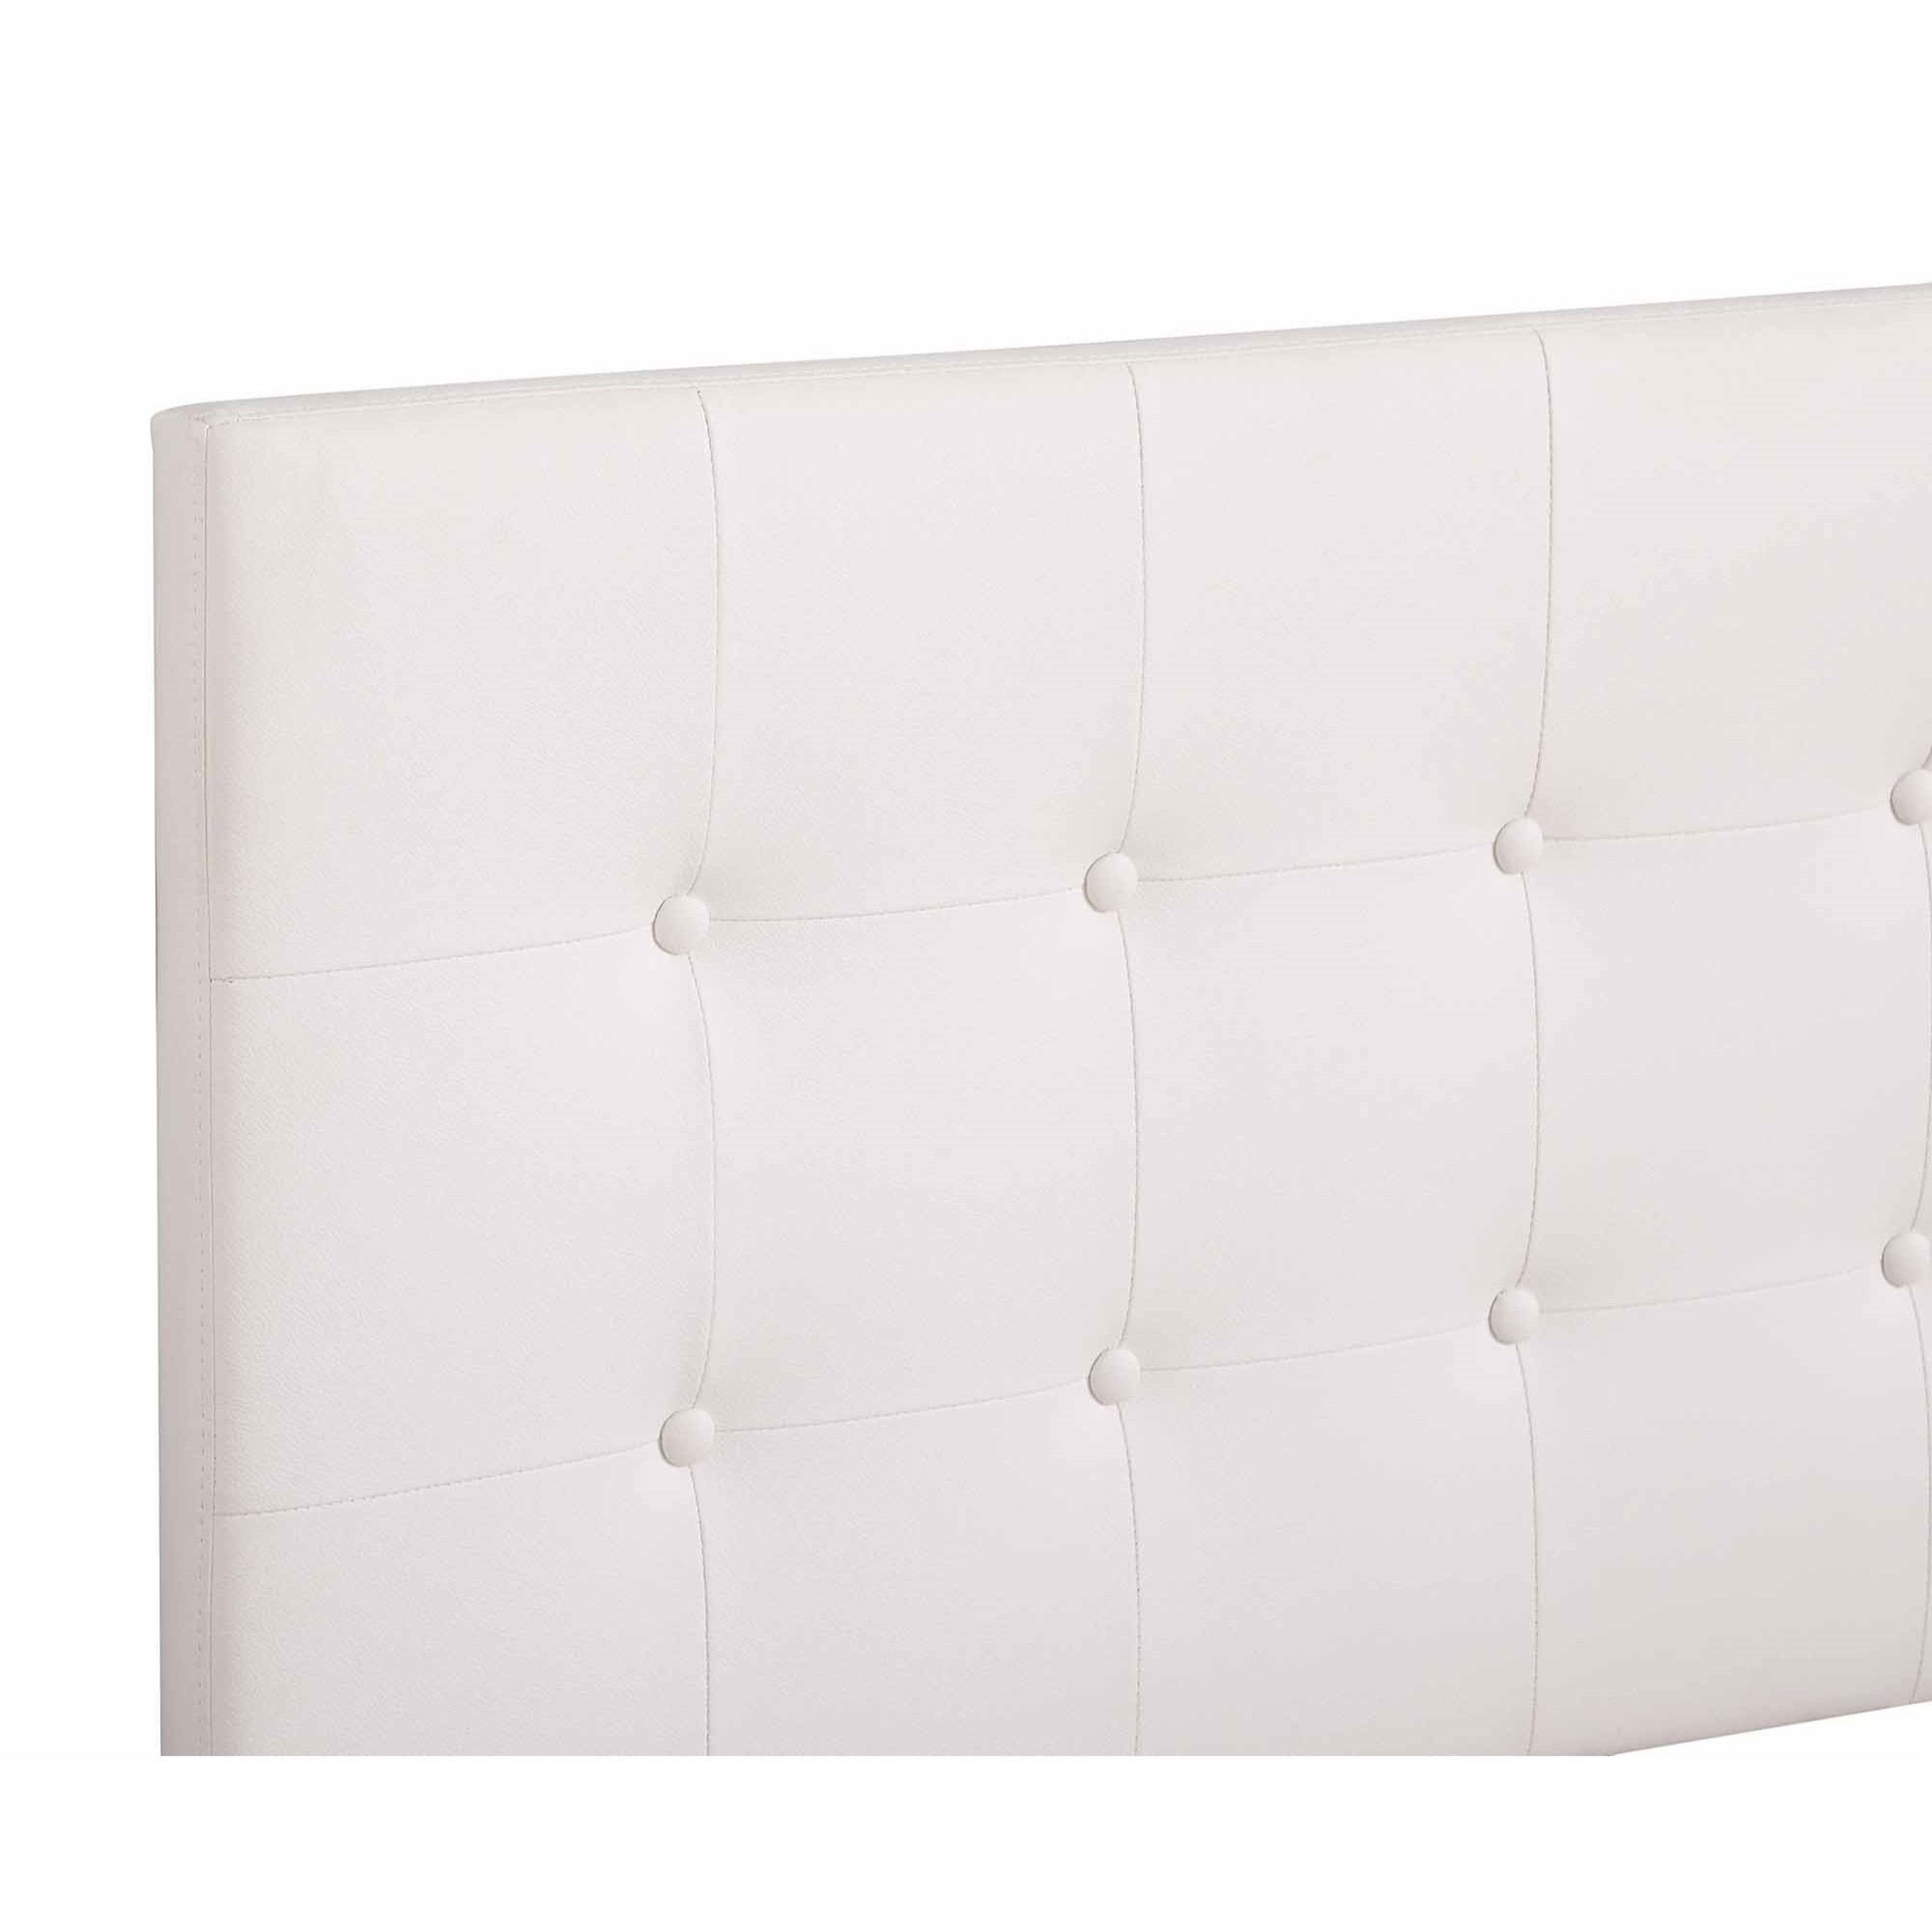 Passion Furniture  Caldwell Faux Leather Button Tufted Panel Bed, White - King Size - image 4 of 5